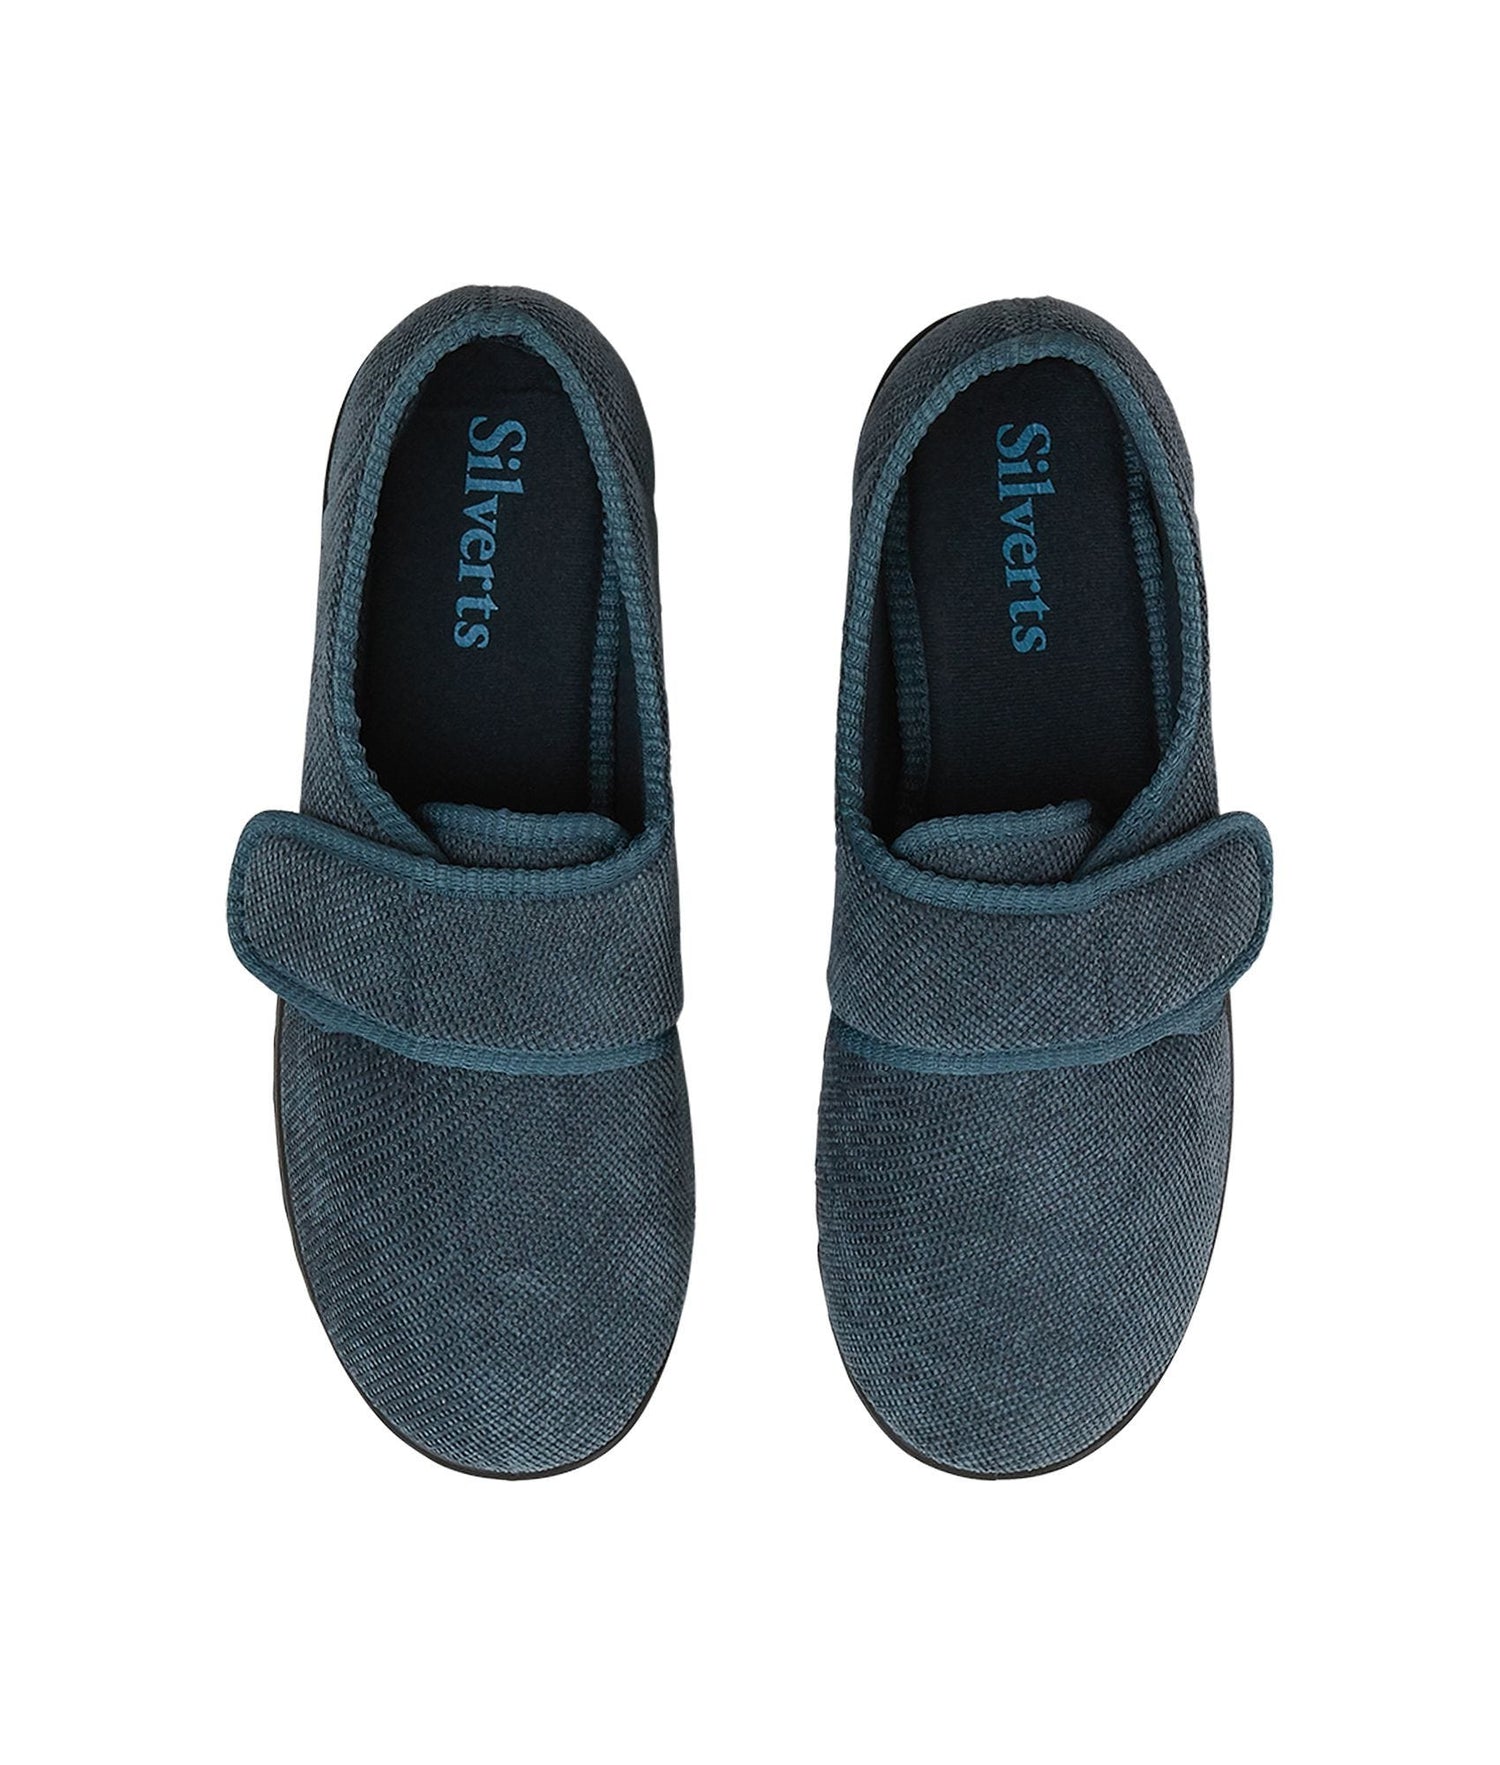 Top of wide grey indoor slippers with Velcro closures and removable memory foam insoles